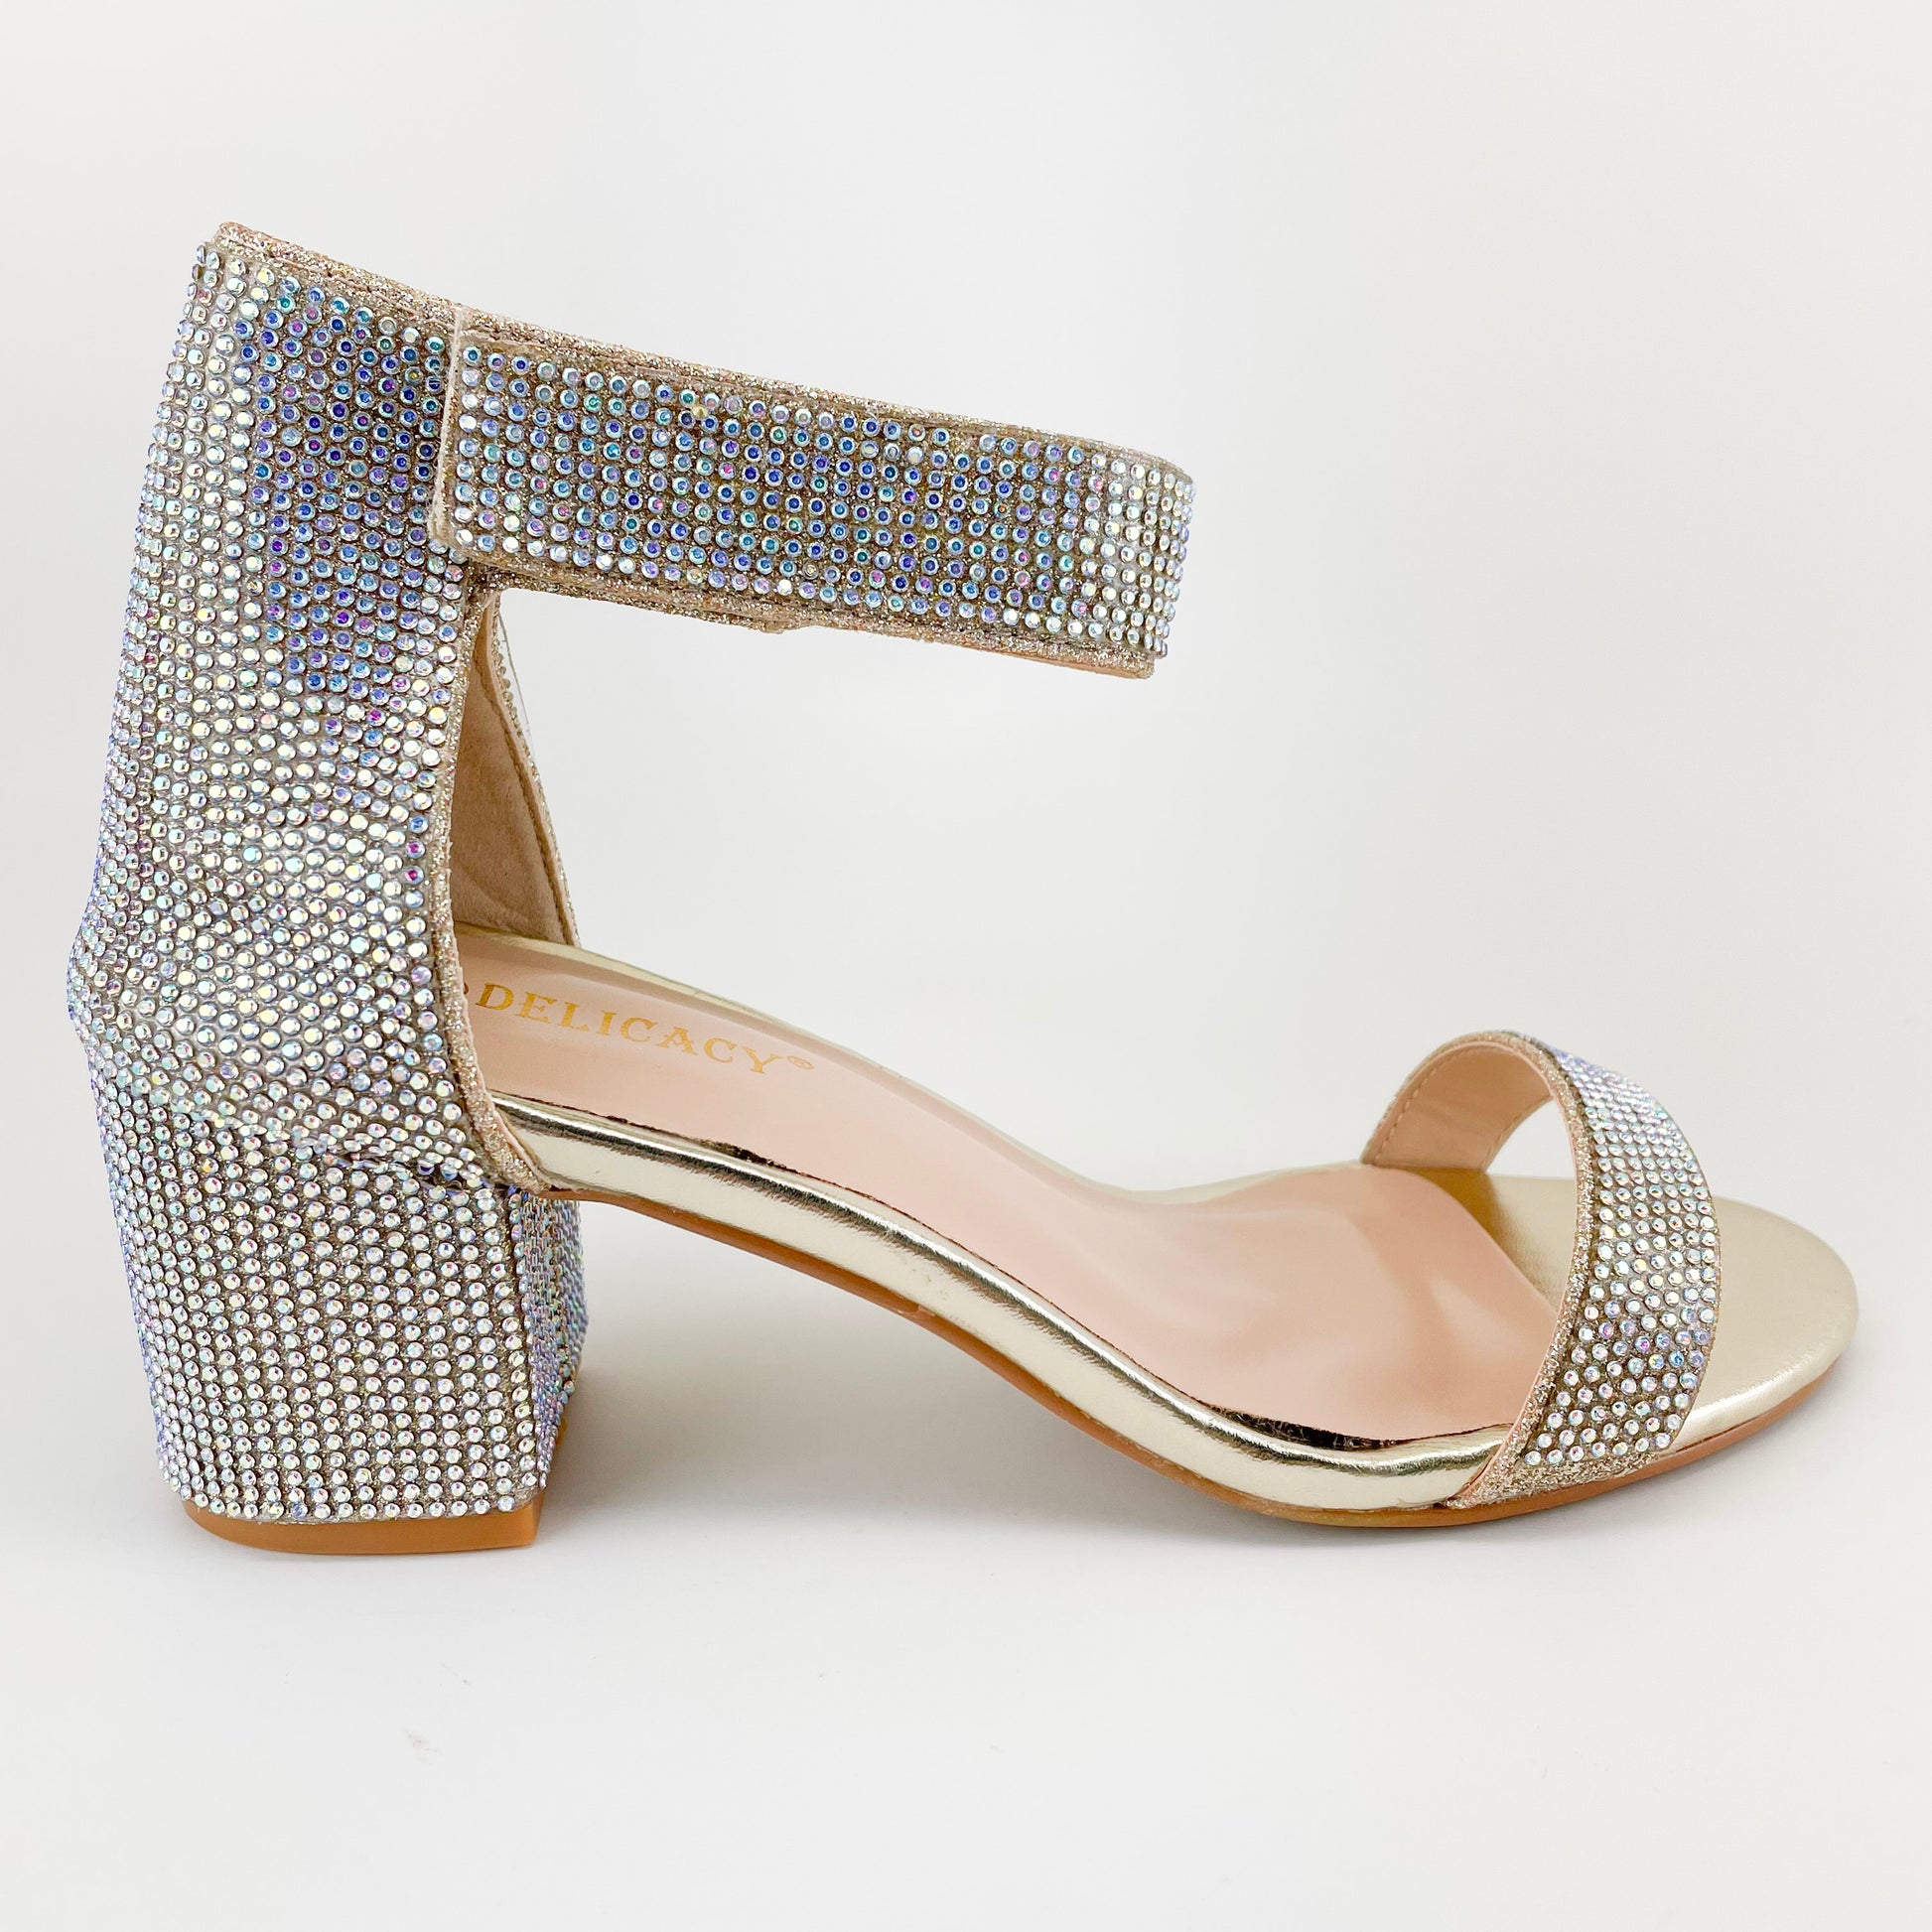 forever link delicacy champagne gold rhinestone block heels